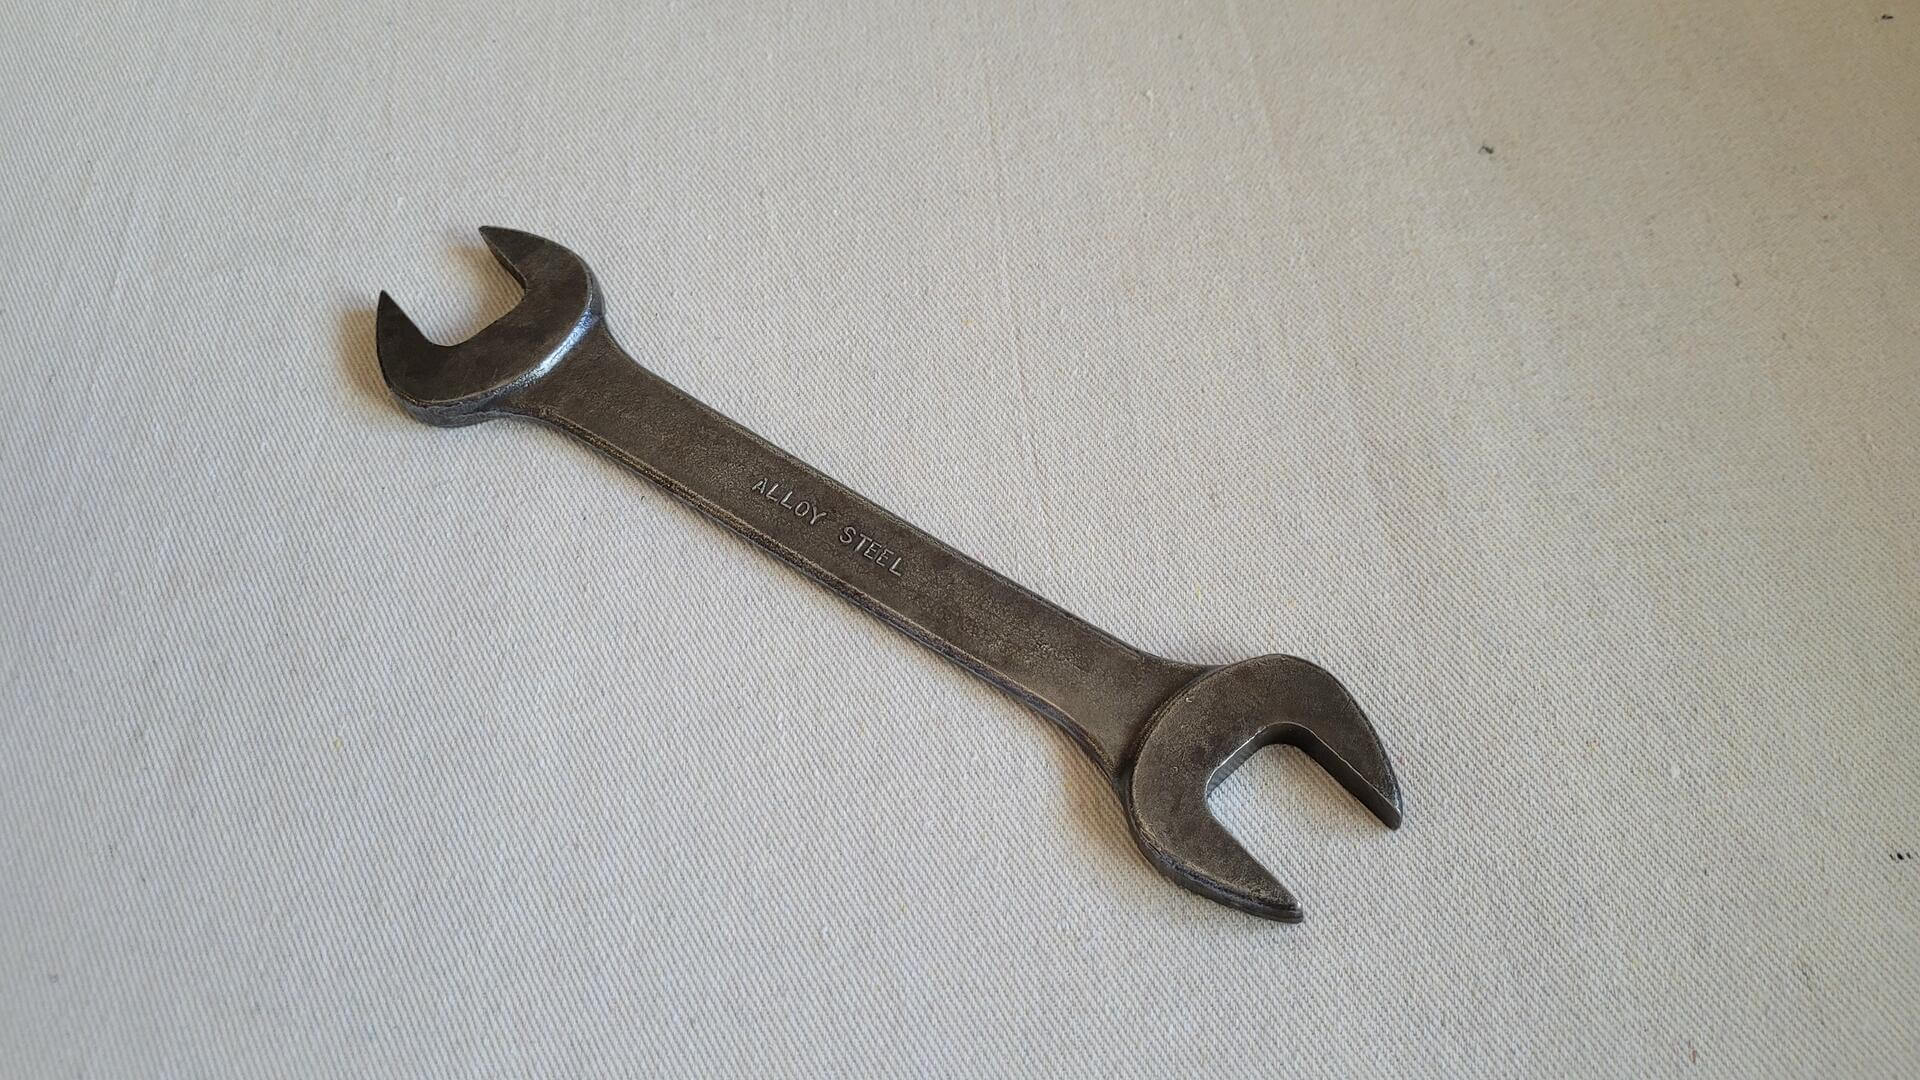 Beautiful vintage Gray Canada forged steel 9 inch open end wrench spanner 15/16 x 1". Antique made in Canada collectible automotive hand tools